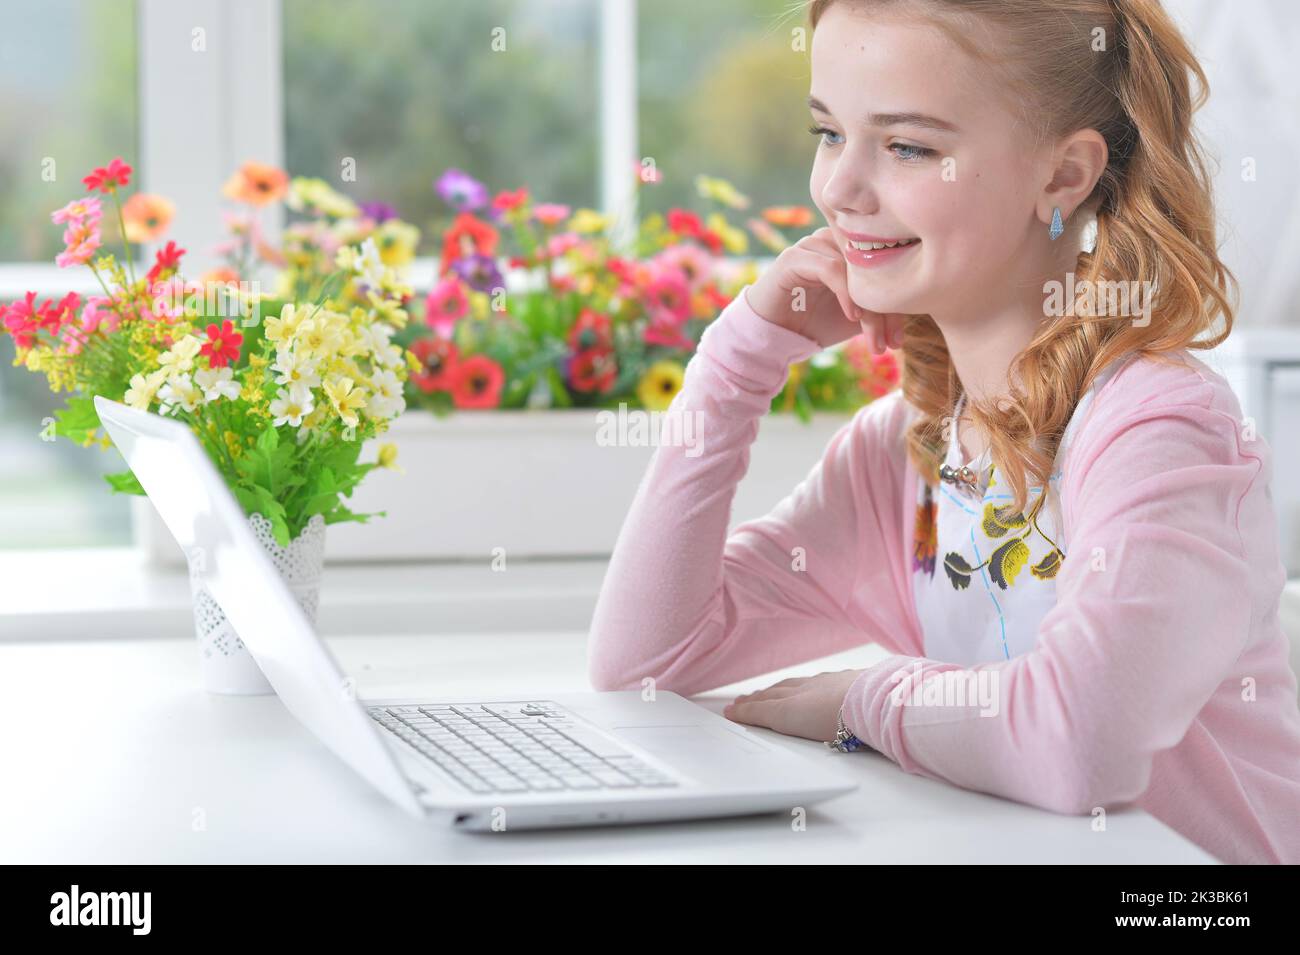 Teenage girl sitting at a table with a laptopt at home. Stock Photo